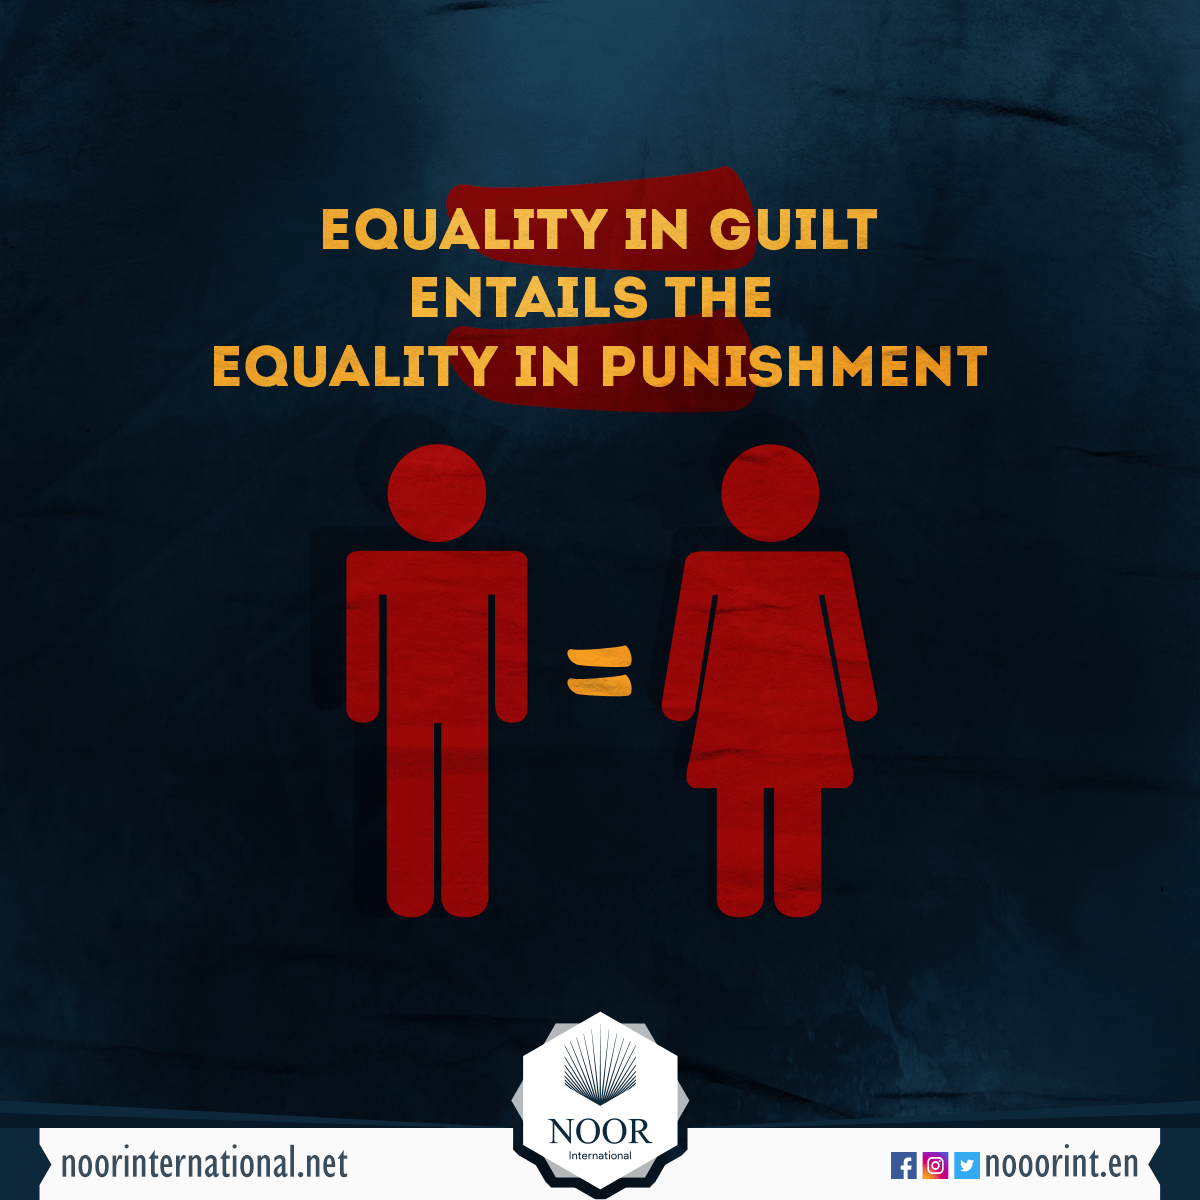 Equality in guilt entails the equality in punishment